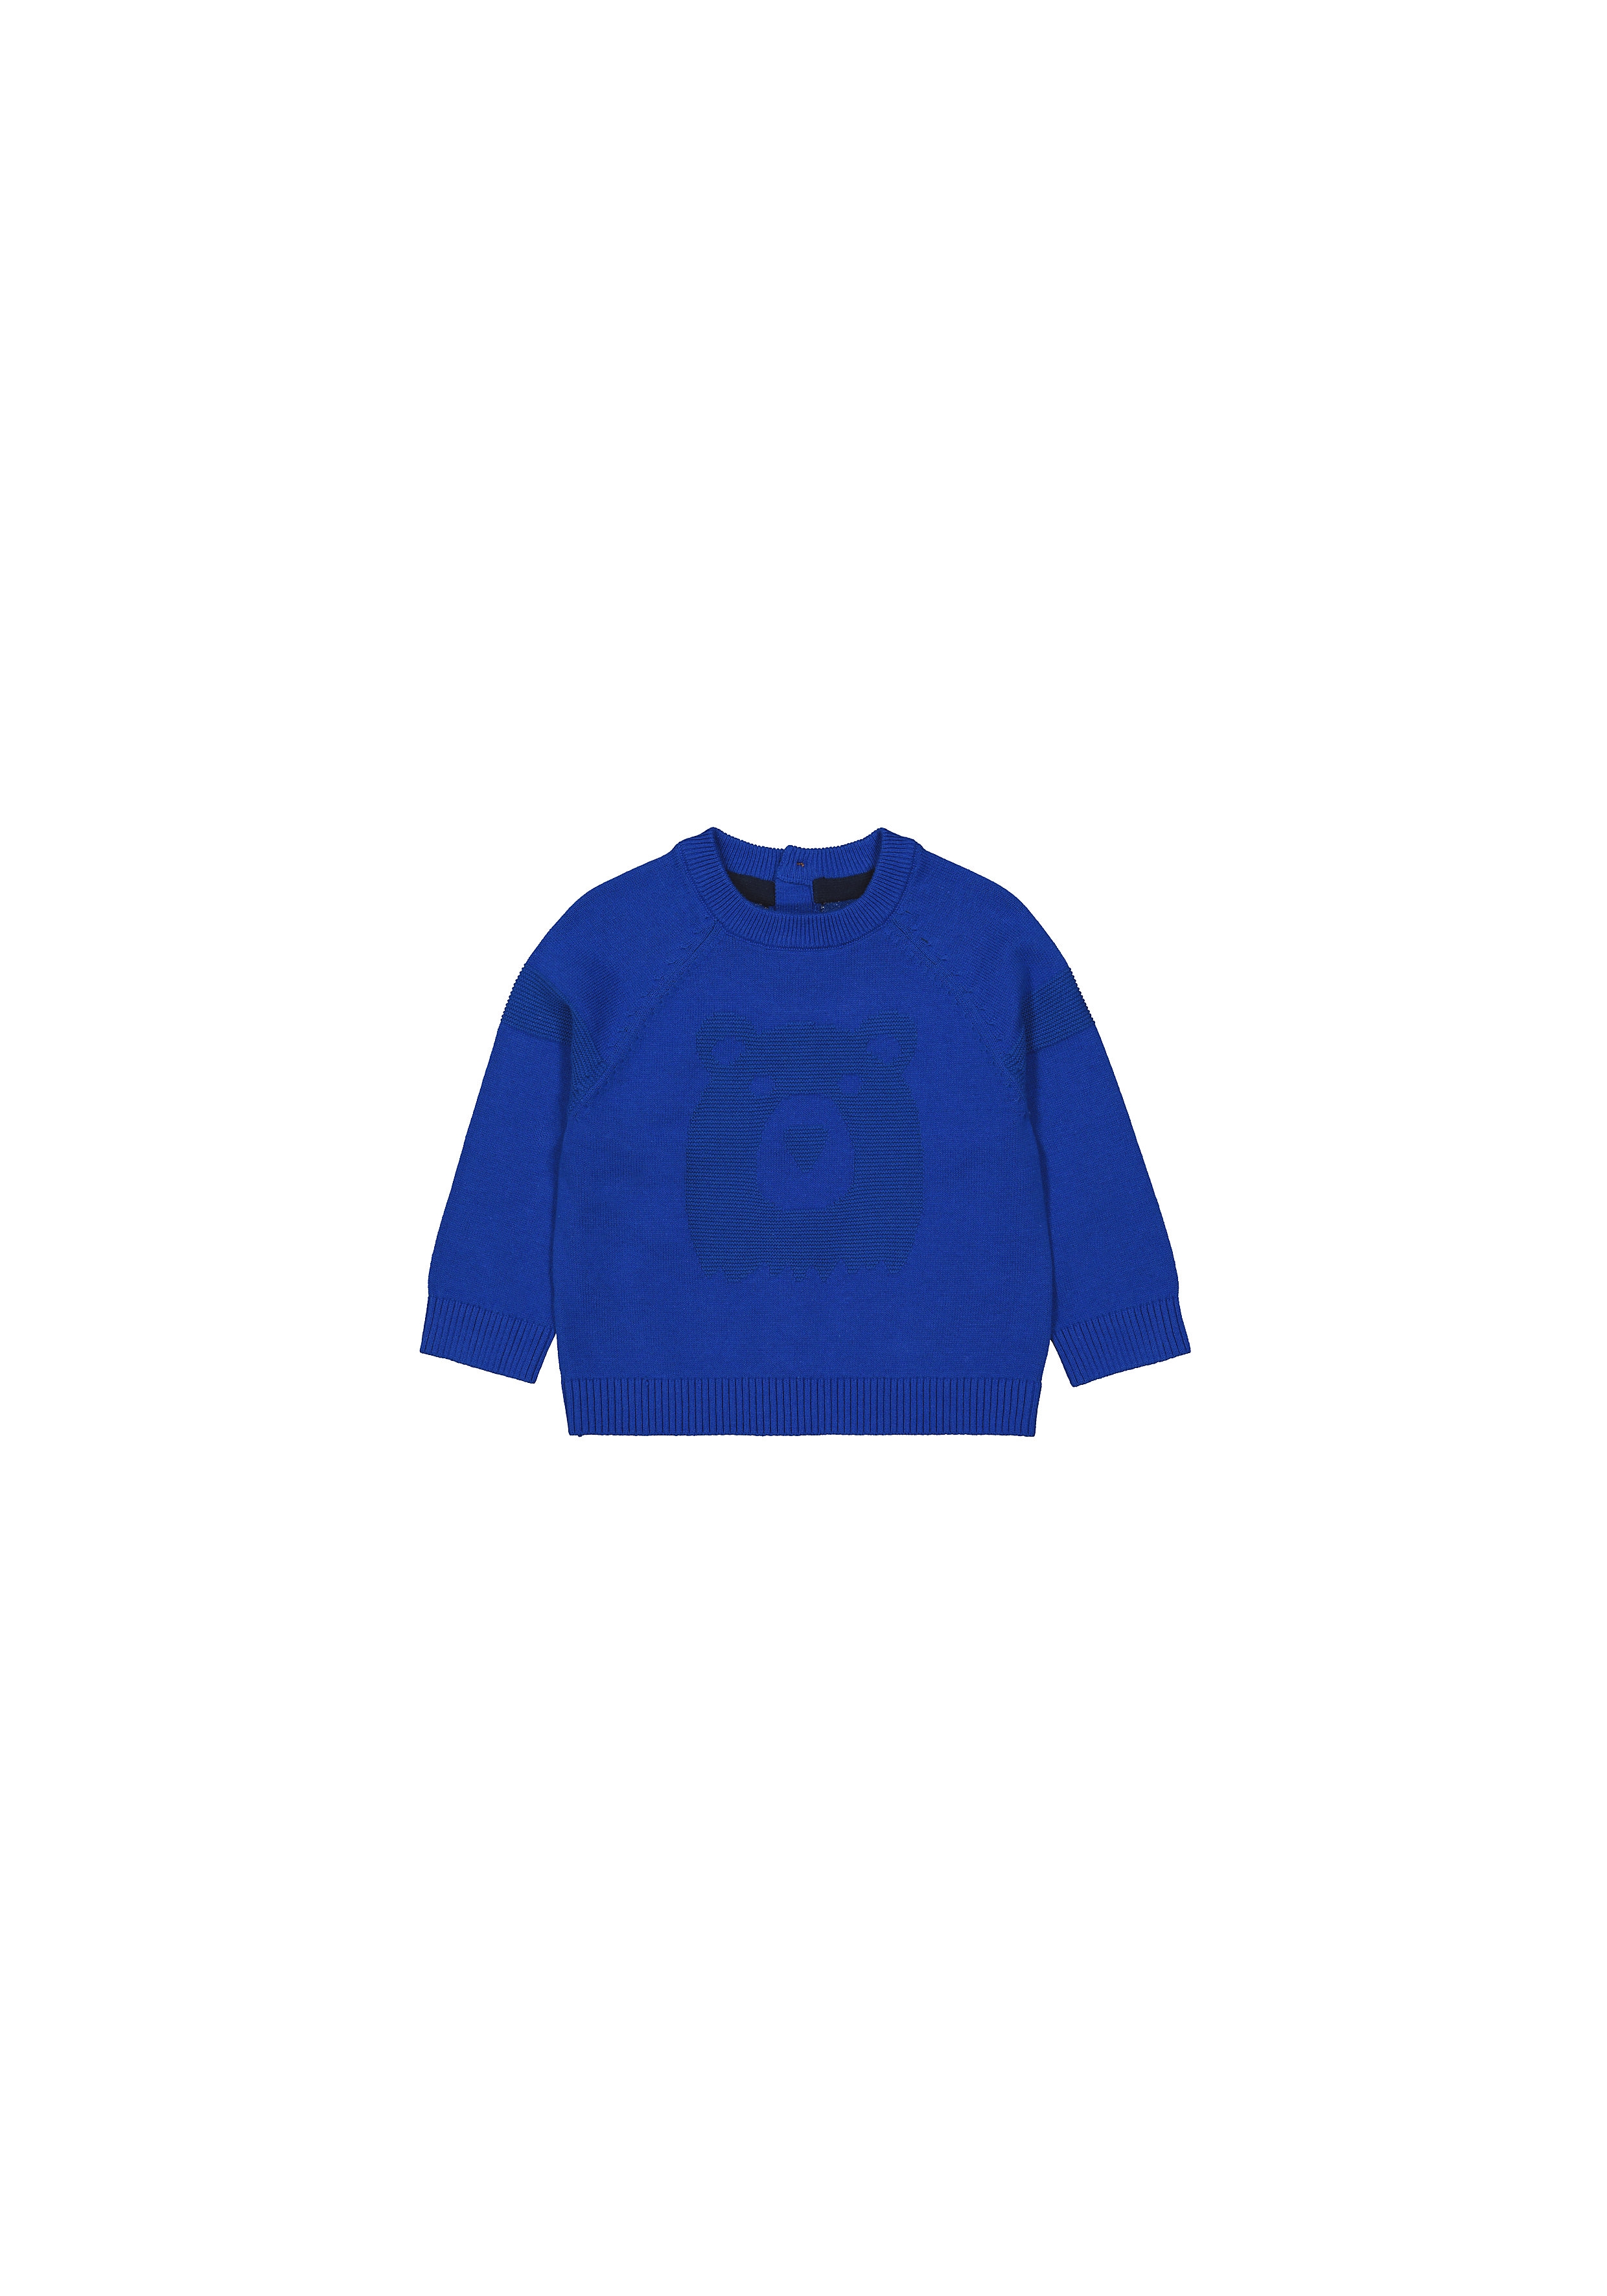 Mothercare | Boys Full Sleeves Sweaters  - Blue